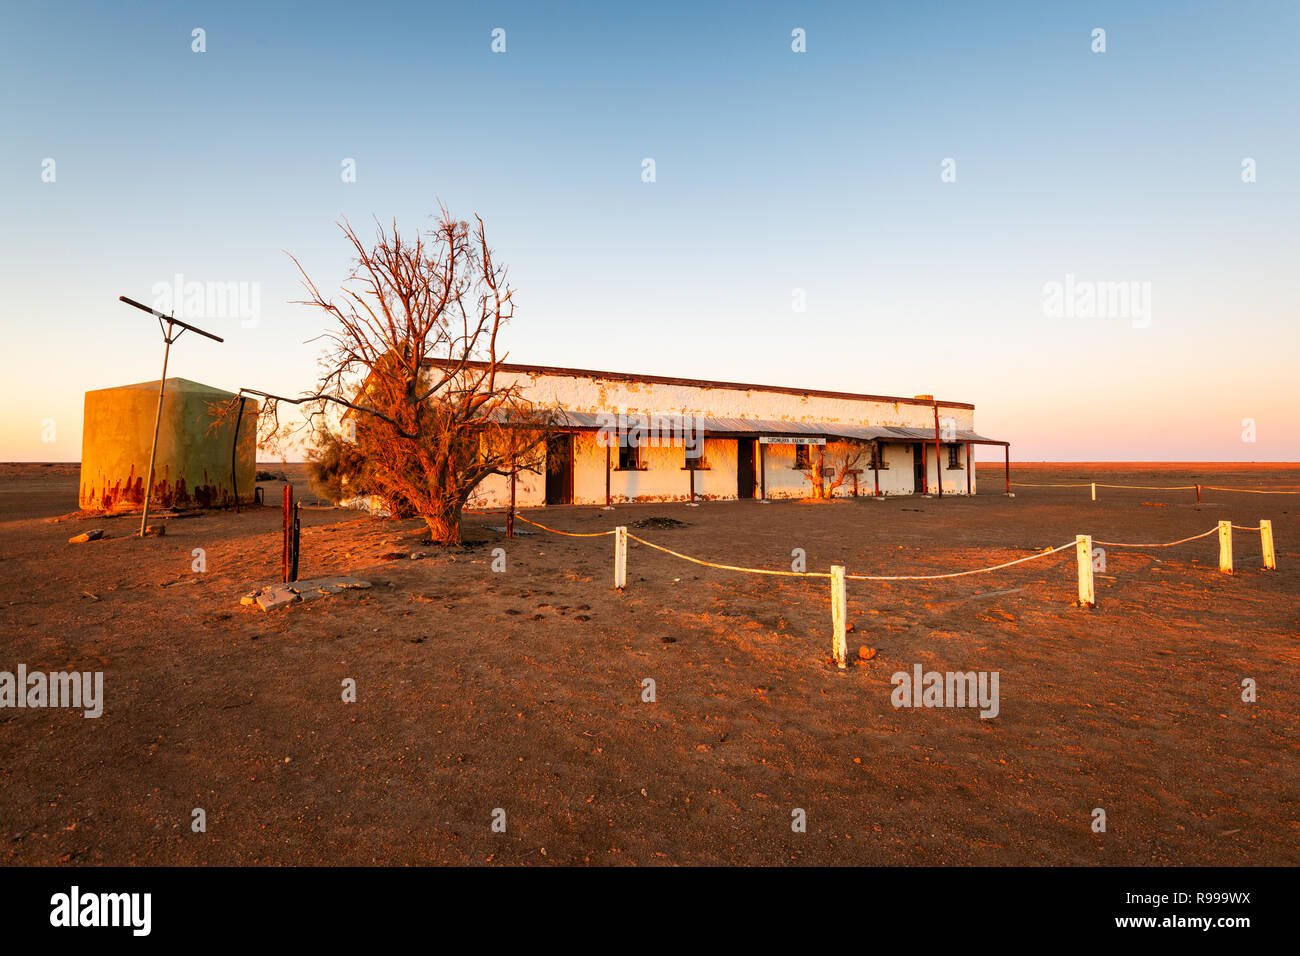 Historical Curdimurka Siding at the Old Ghan Route in South Australia's desert. Stock Photo